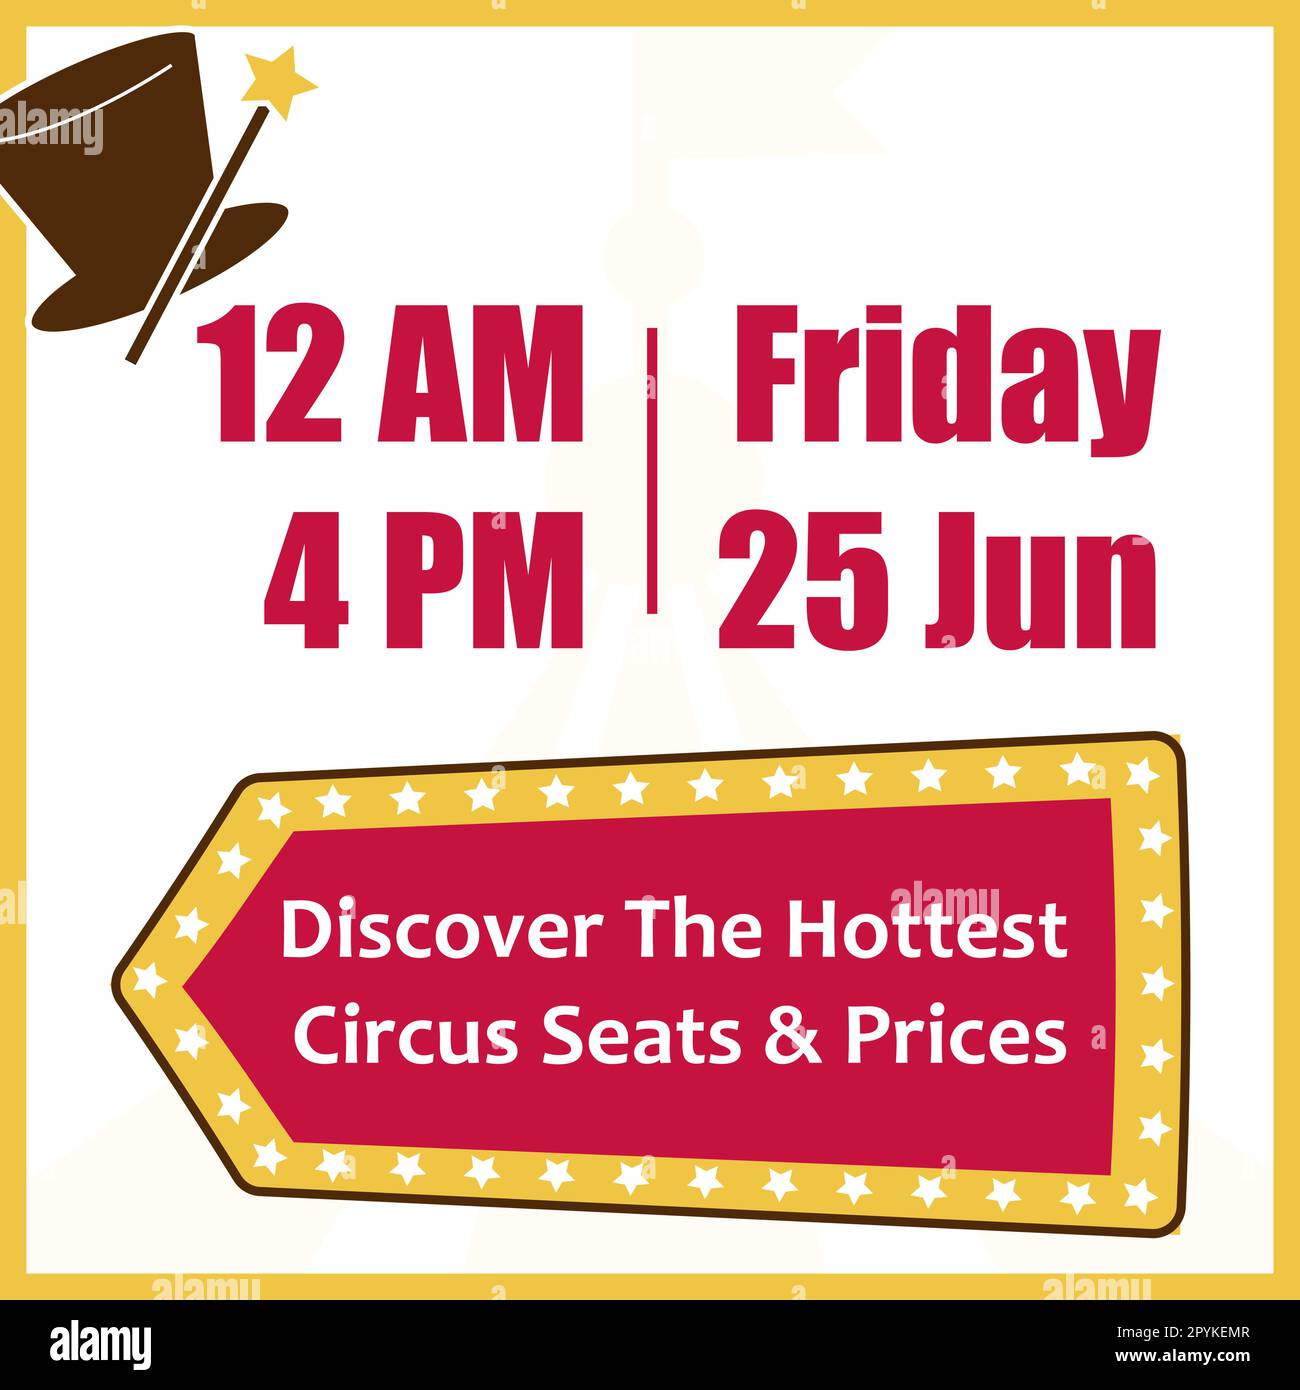 Discover hottest circus seats and prices, banner Stock Vector